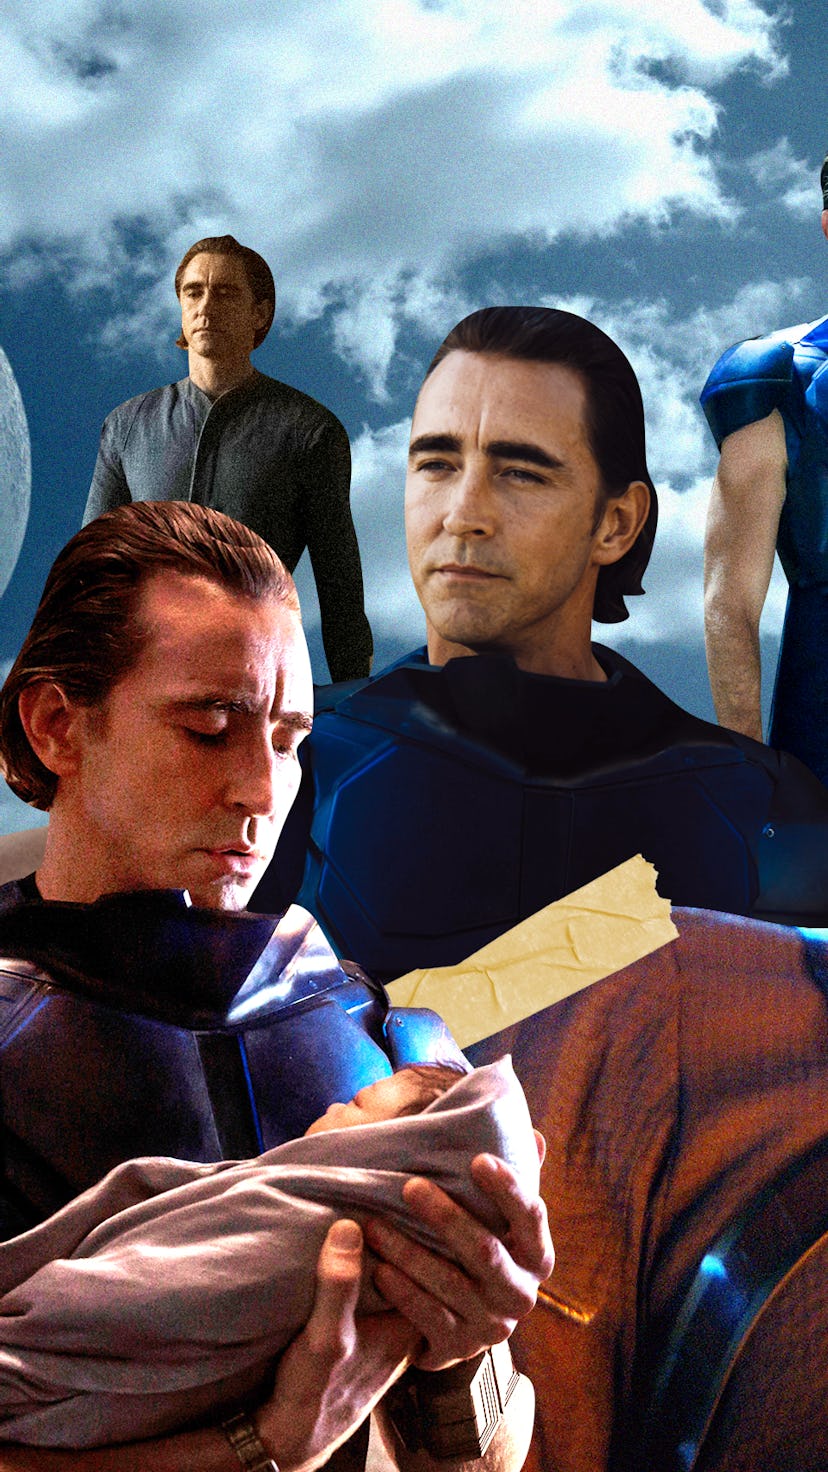 Lee Pace on the AppleTV+ series Foundation.